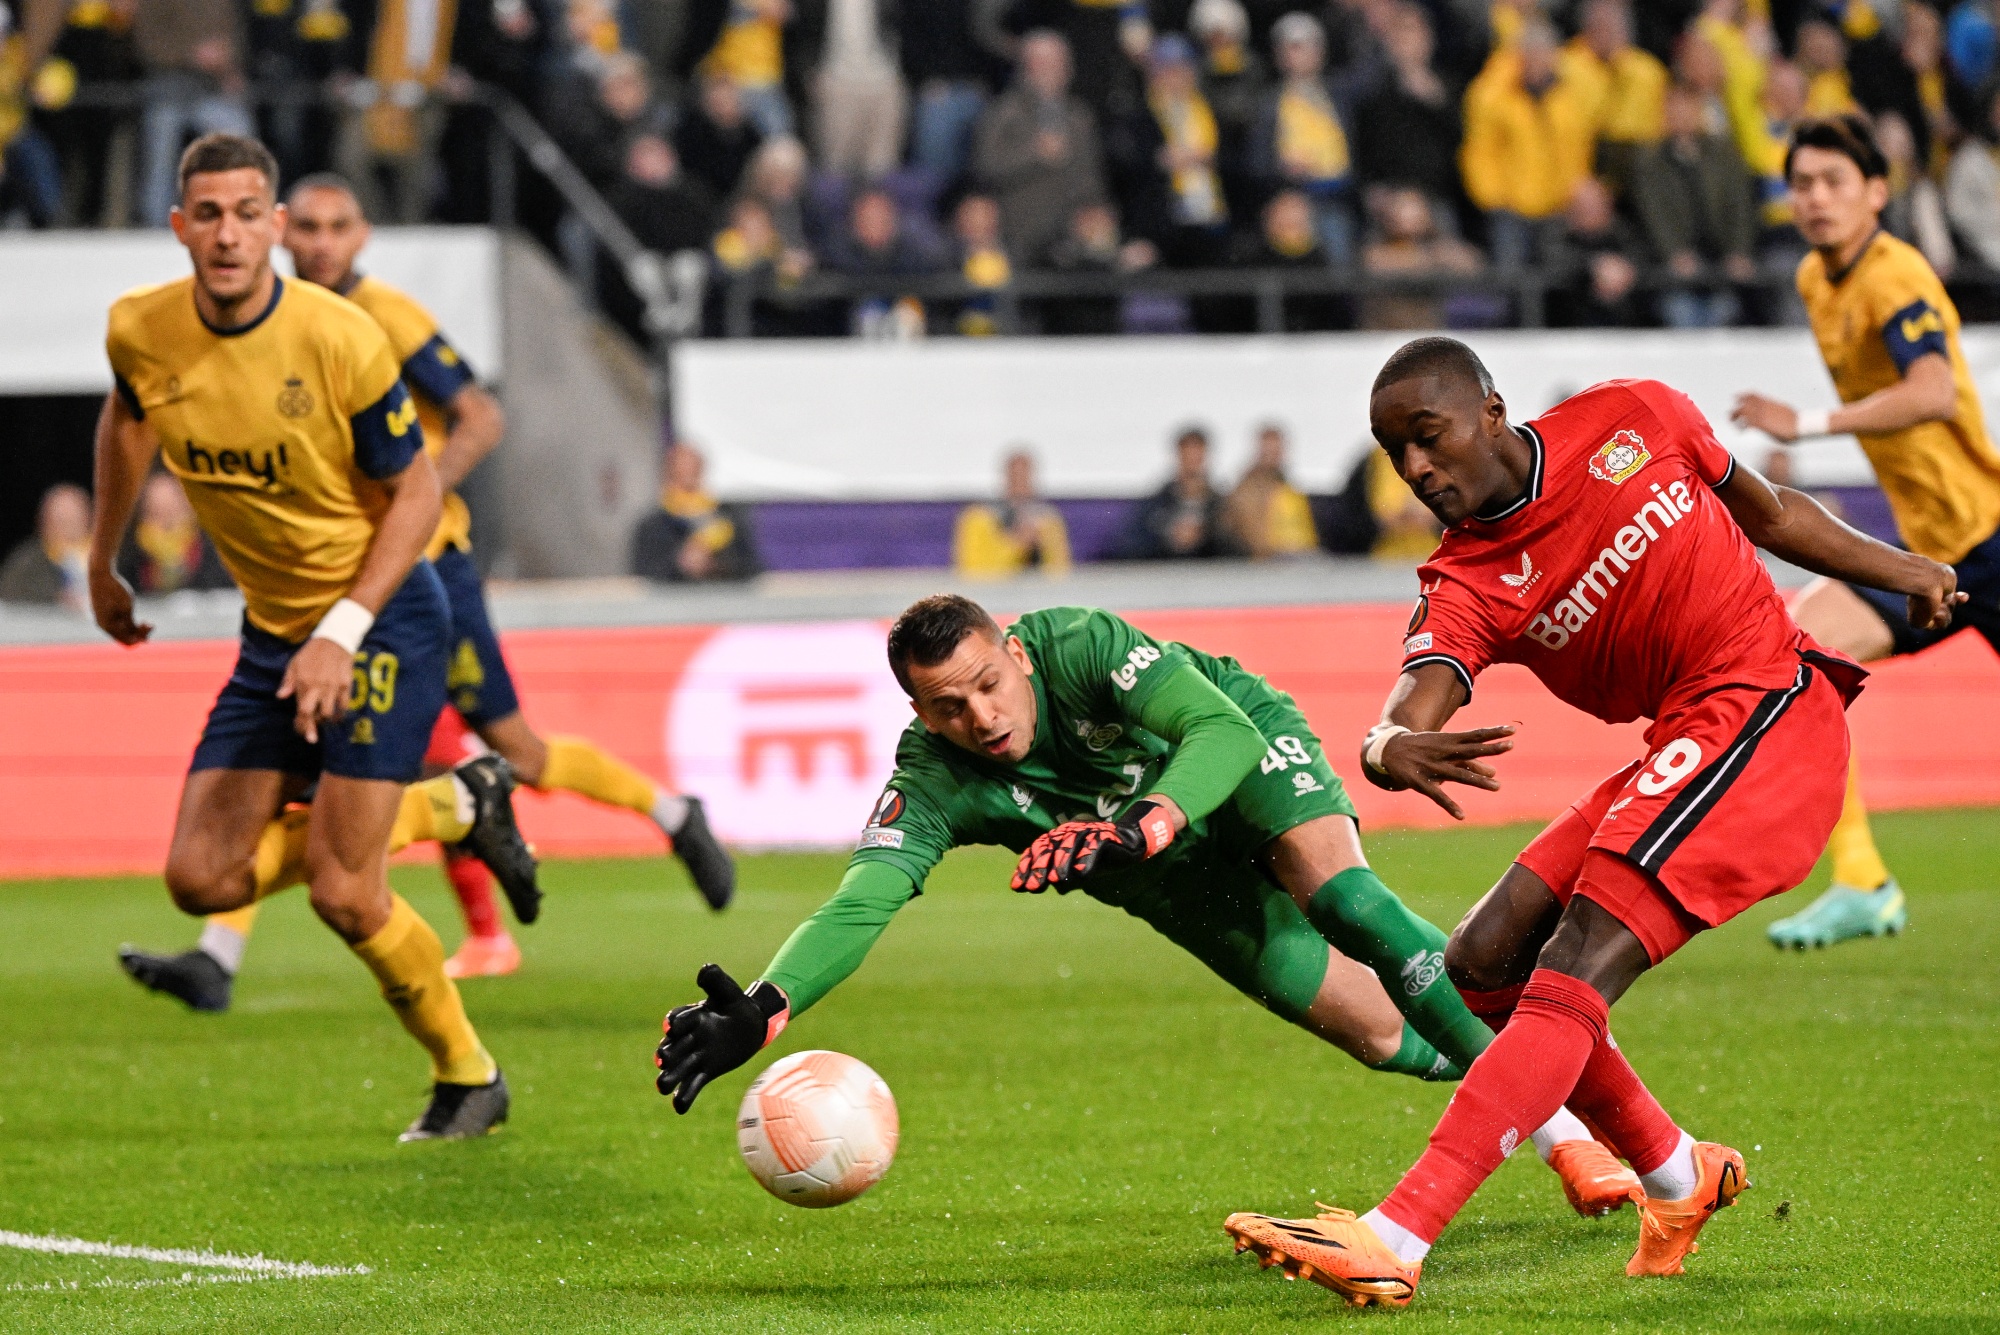 Leverkusen's Moussa Diaby scores a goal during a soccer match between Belgian Royale Union Saint-Gilloise and German Bayer 04 Leverkusen, Thursday 20 April 2023 in Anderlecht, Brussels, the return leg of the quarterfinals of the UEFA Europa League competition. The first leg ended in a 1-1 draw. BELGA PHOTO LAURIE DIEFFEMBACQ